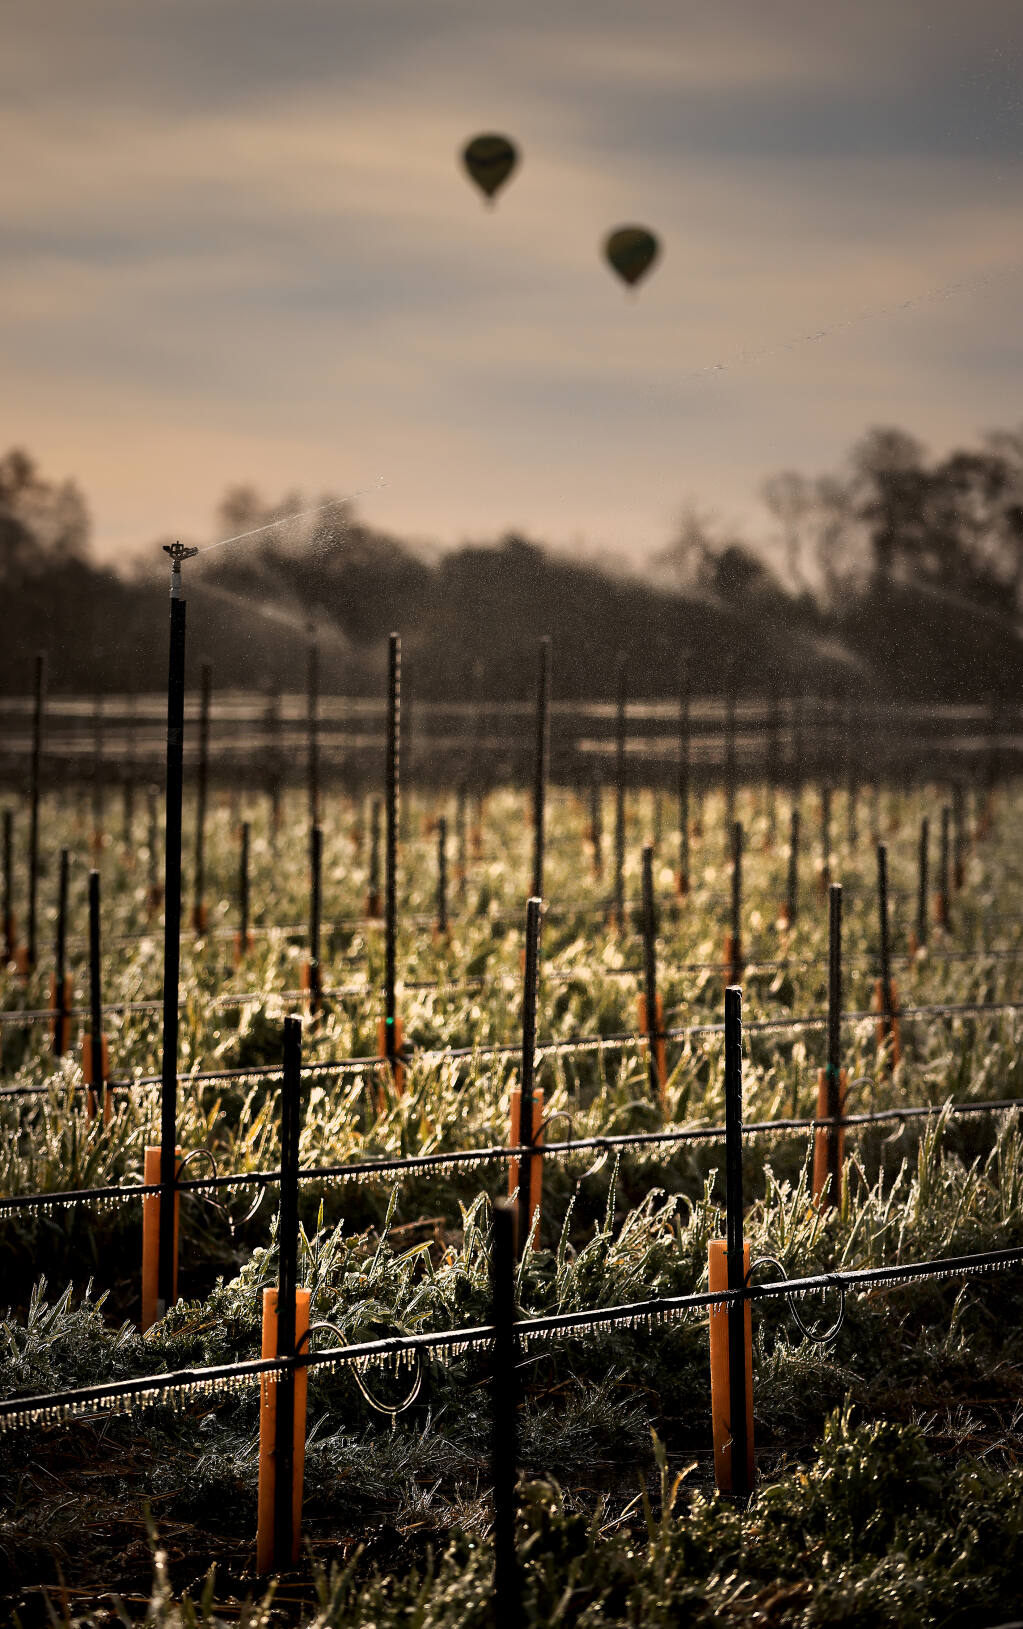 A vineyard along Slusser Rd.is coated in ice as some growers initiate frost protection measures due to the below freezing temperatures, Saturday, Feb. 26, 2022 near Santa Rosa.  (Kent Porter / The Press Democrat) 2022